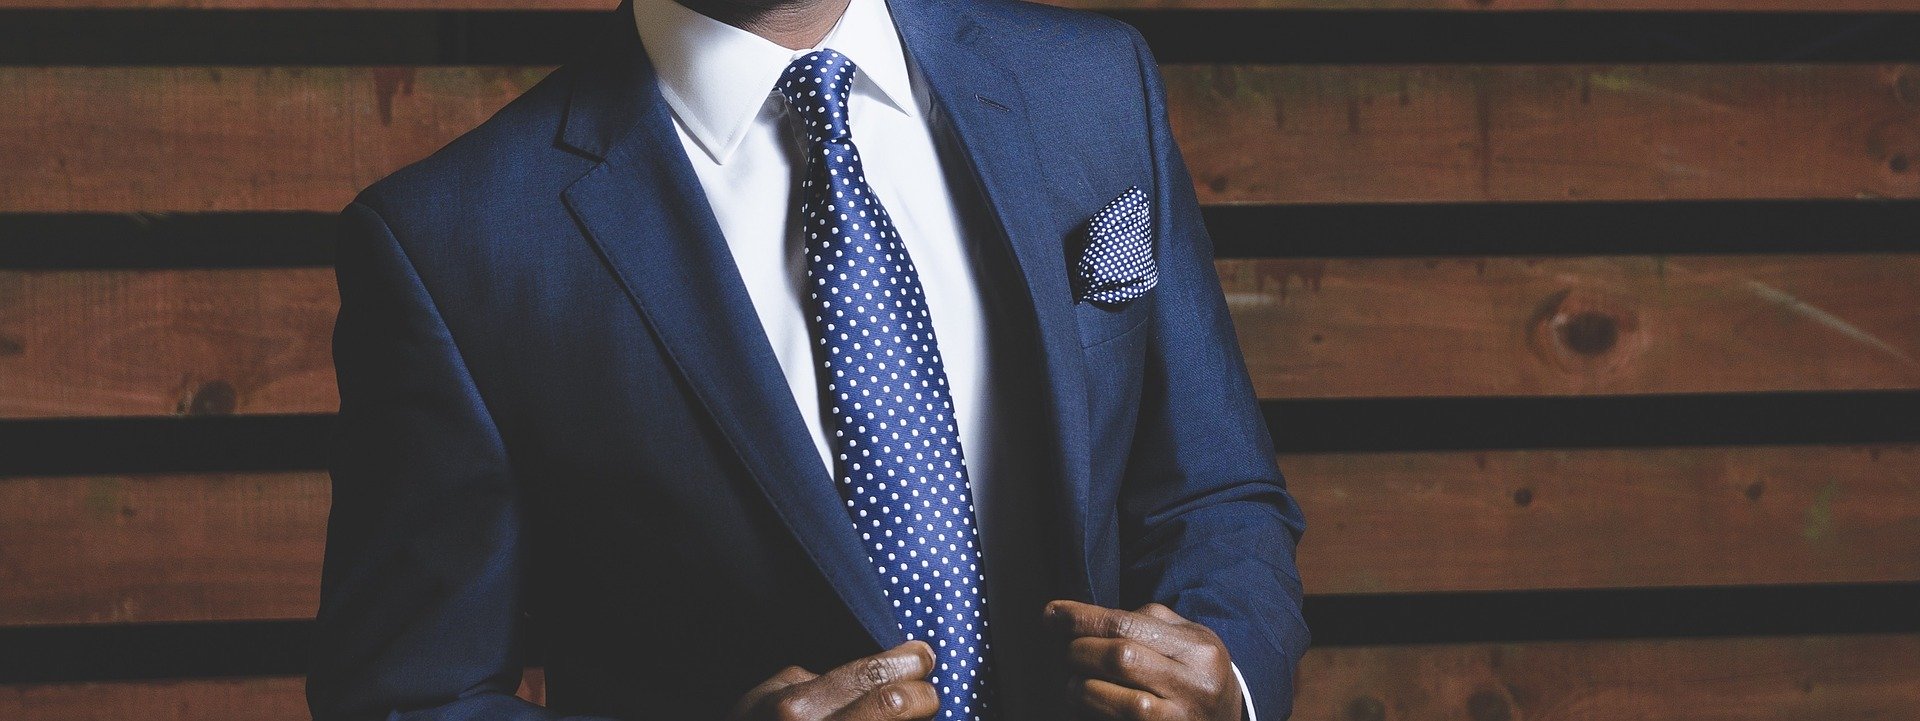 How to Dress for Success Before You Are Successful